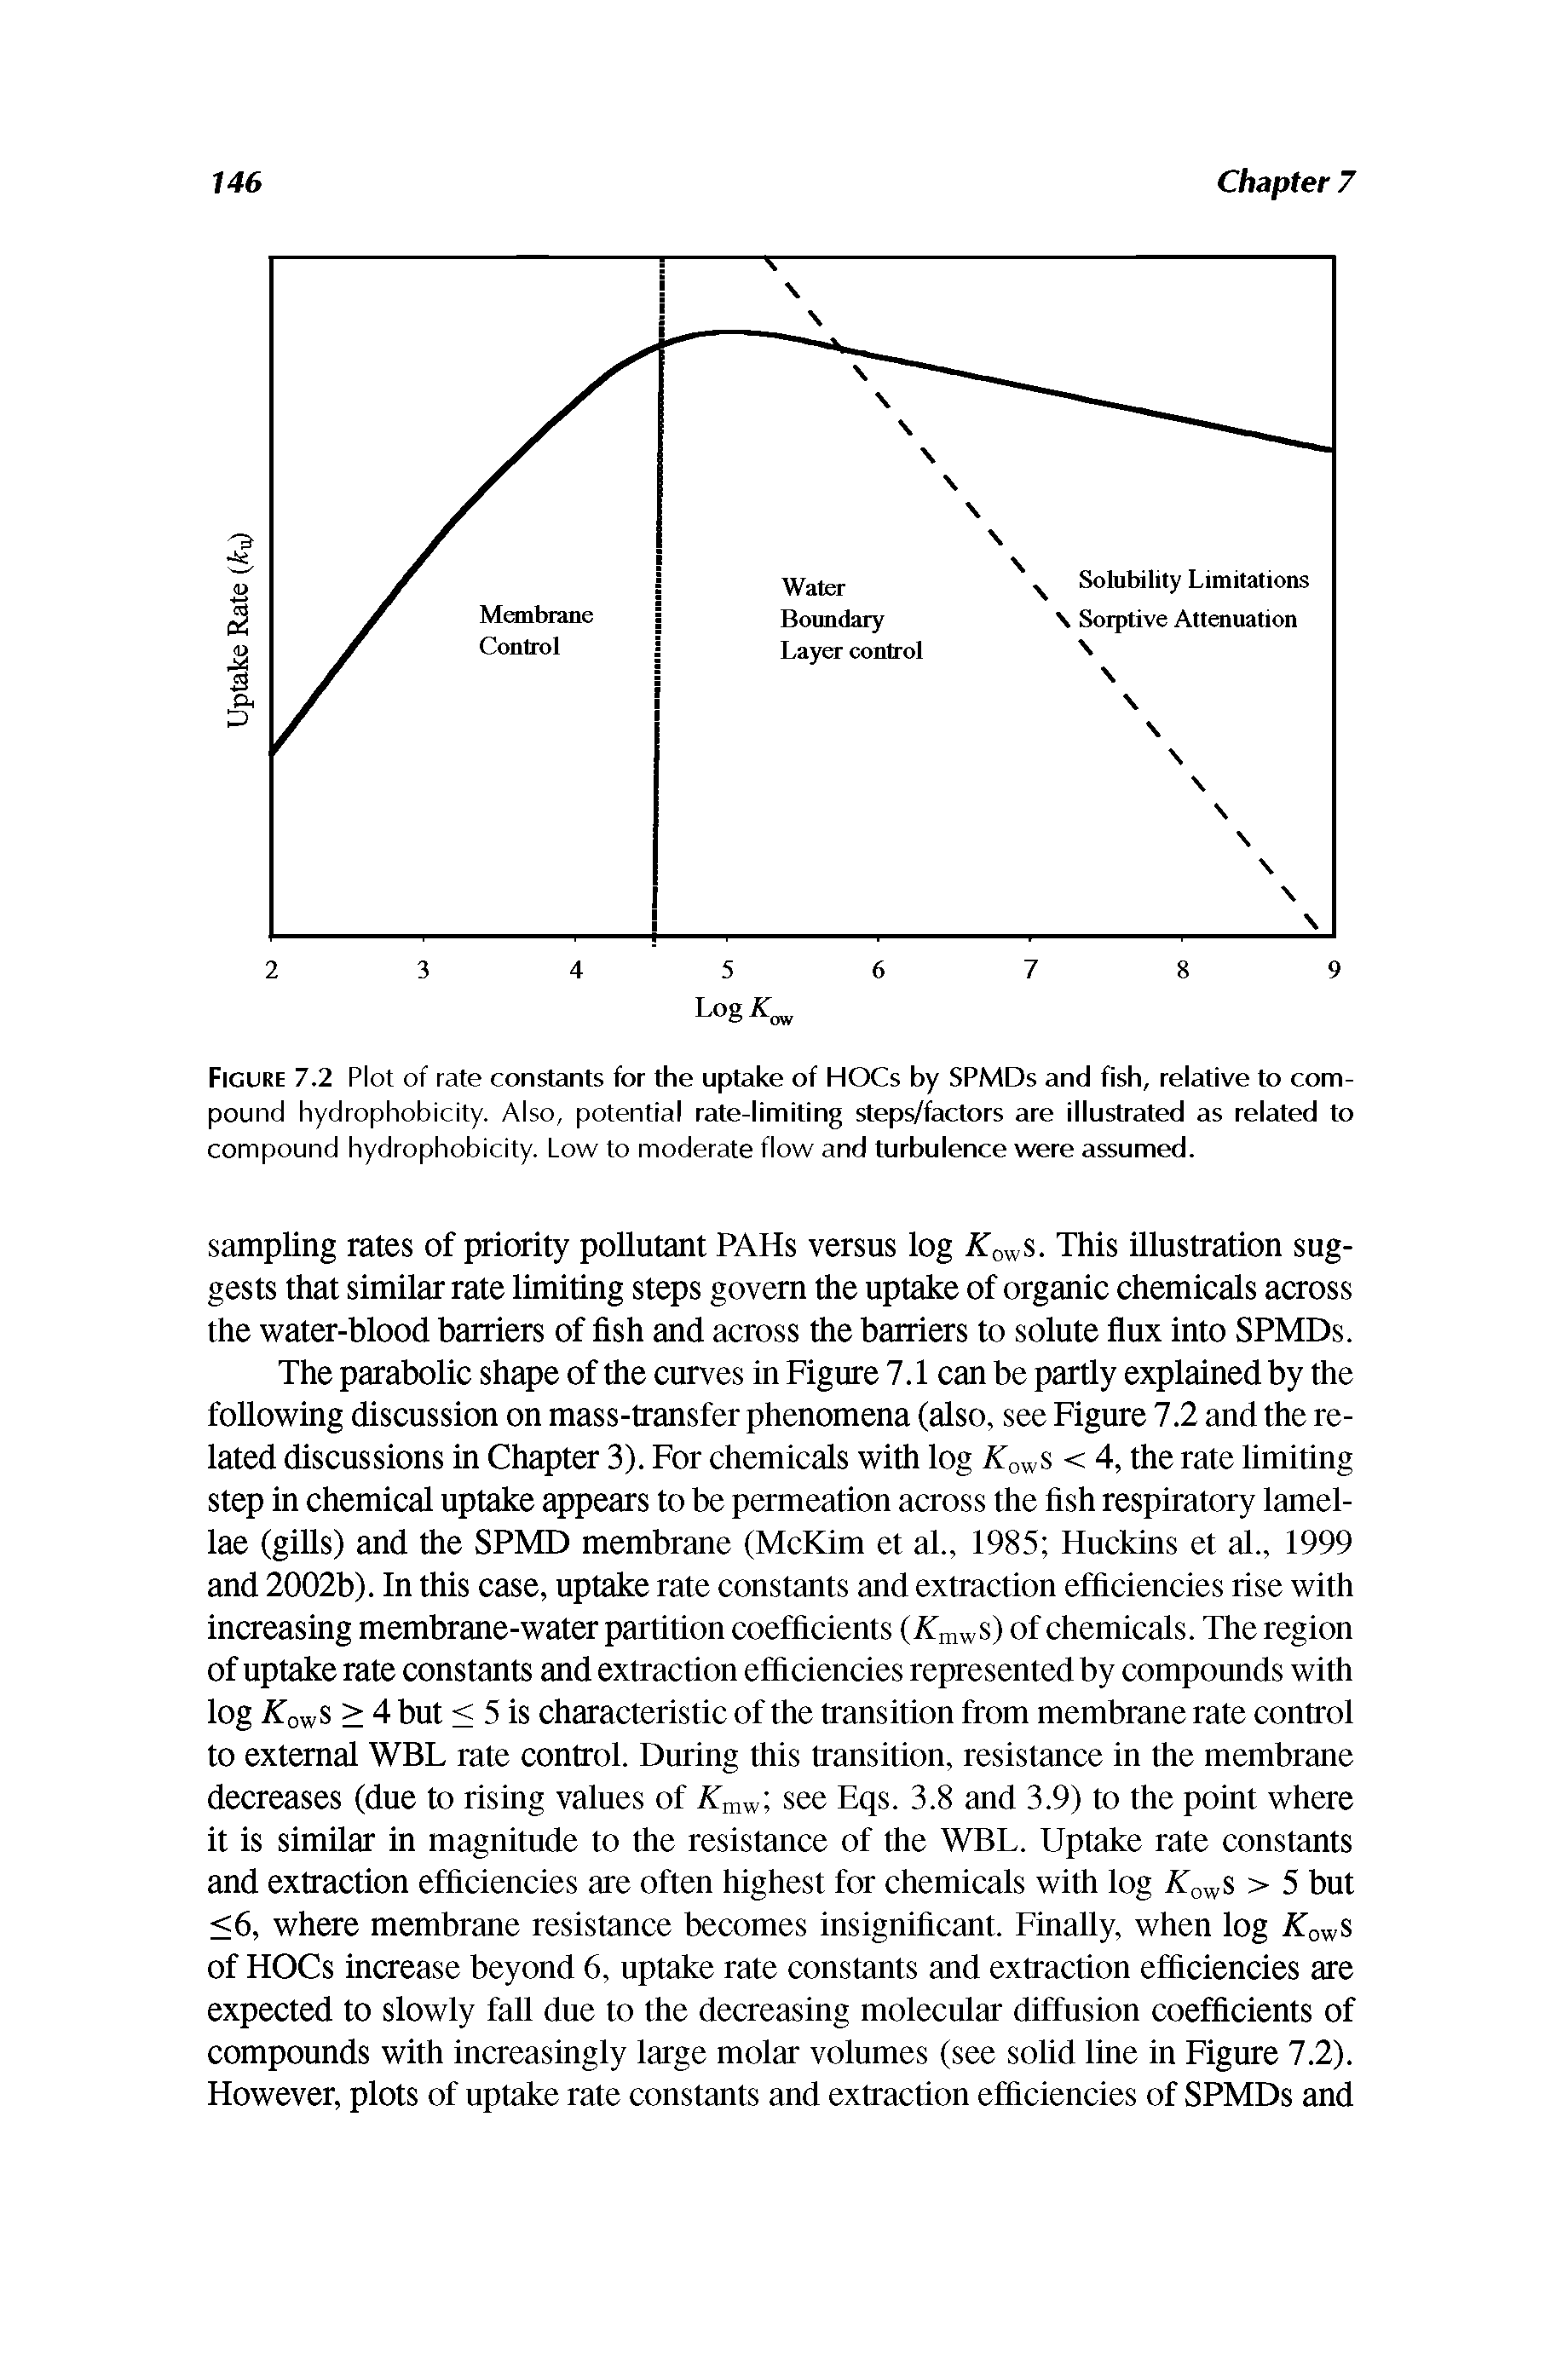 Figure 7.2 Plot of rate constants for the uptake of HOCs by SPMDs and fish, relative to compound hydrophobicity. Also, potential rate-limiting steps/factors are illustrated as related to compound hydrophobicity. Low to moderate flow and turbulence were assumed.